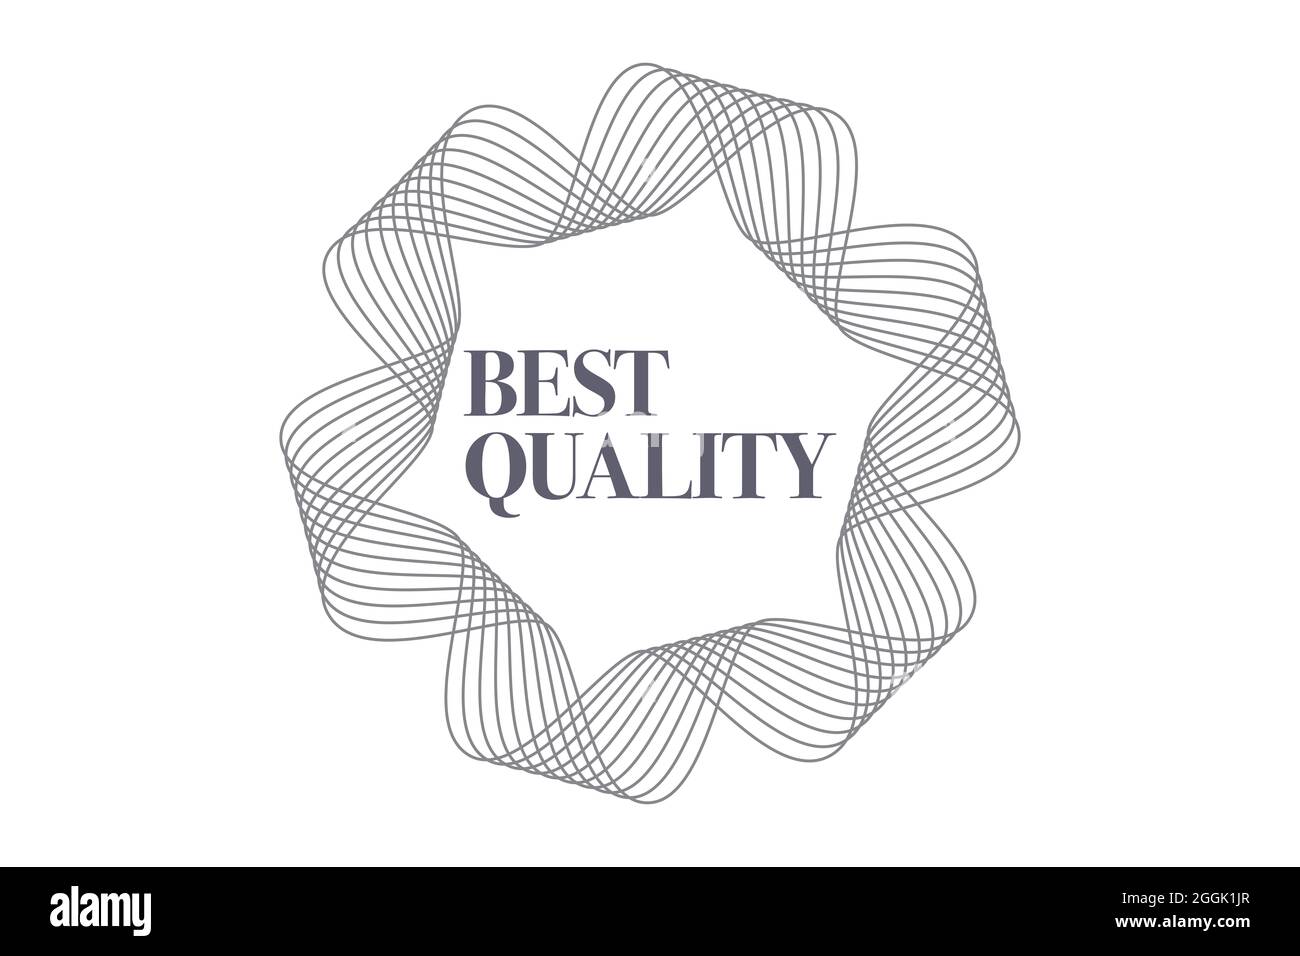 Simple, elegant, minimal graphic design of a saying 'Best Quality' with repetitive lines forming a geometric shape in badge, ribbon abstraction. Cool, Stock Photo